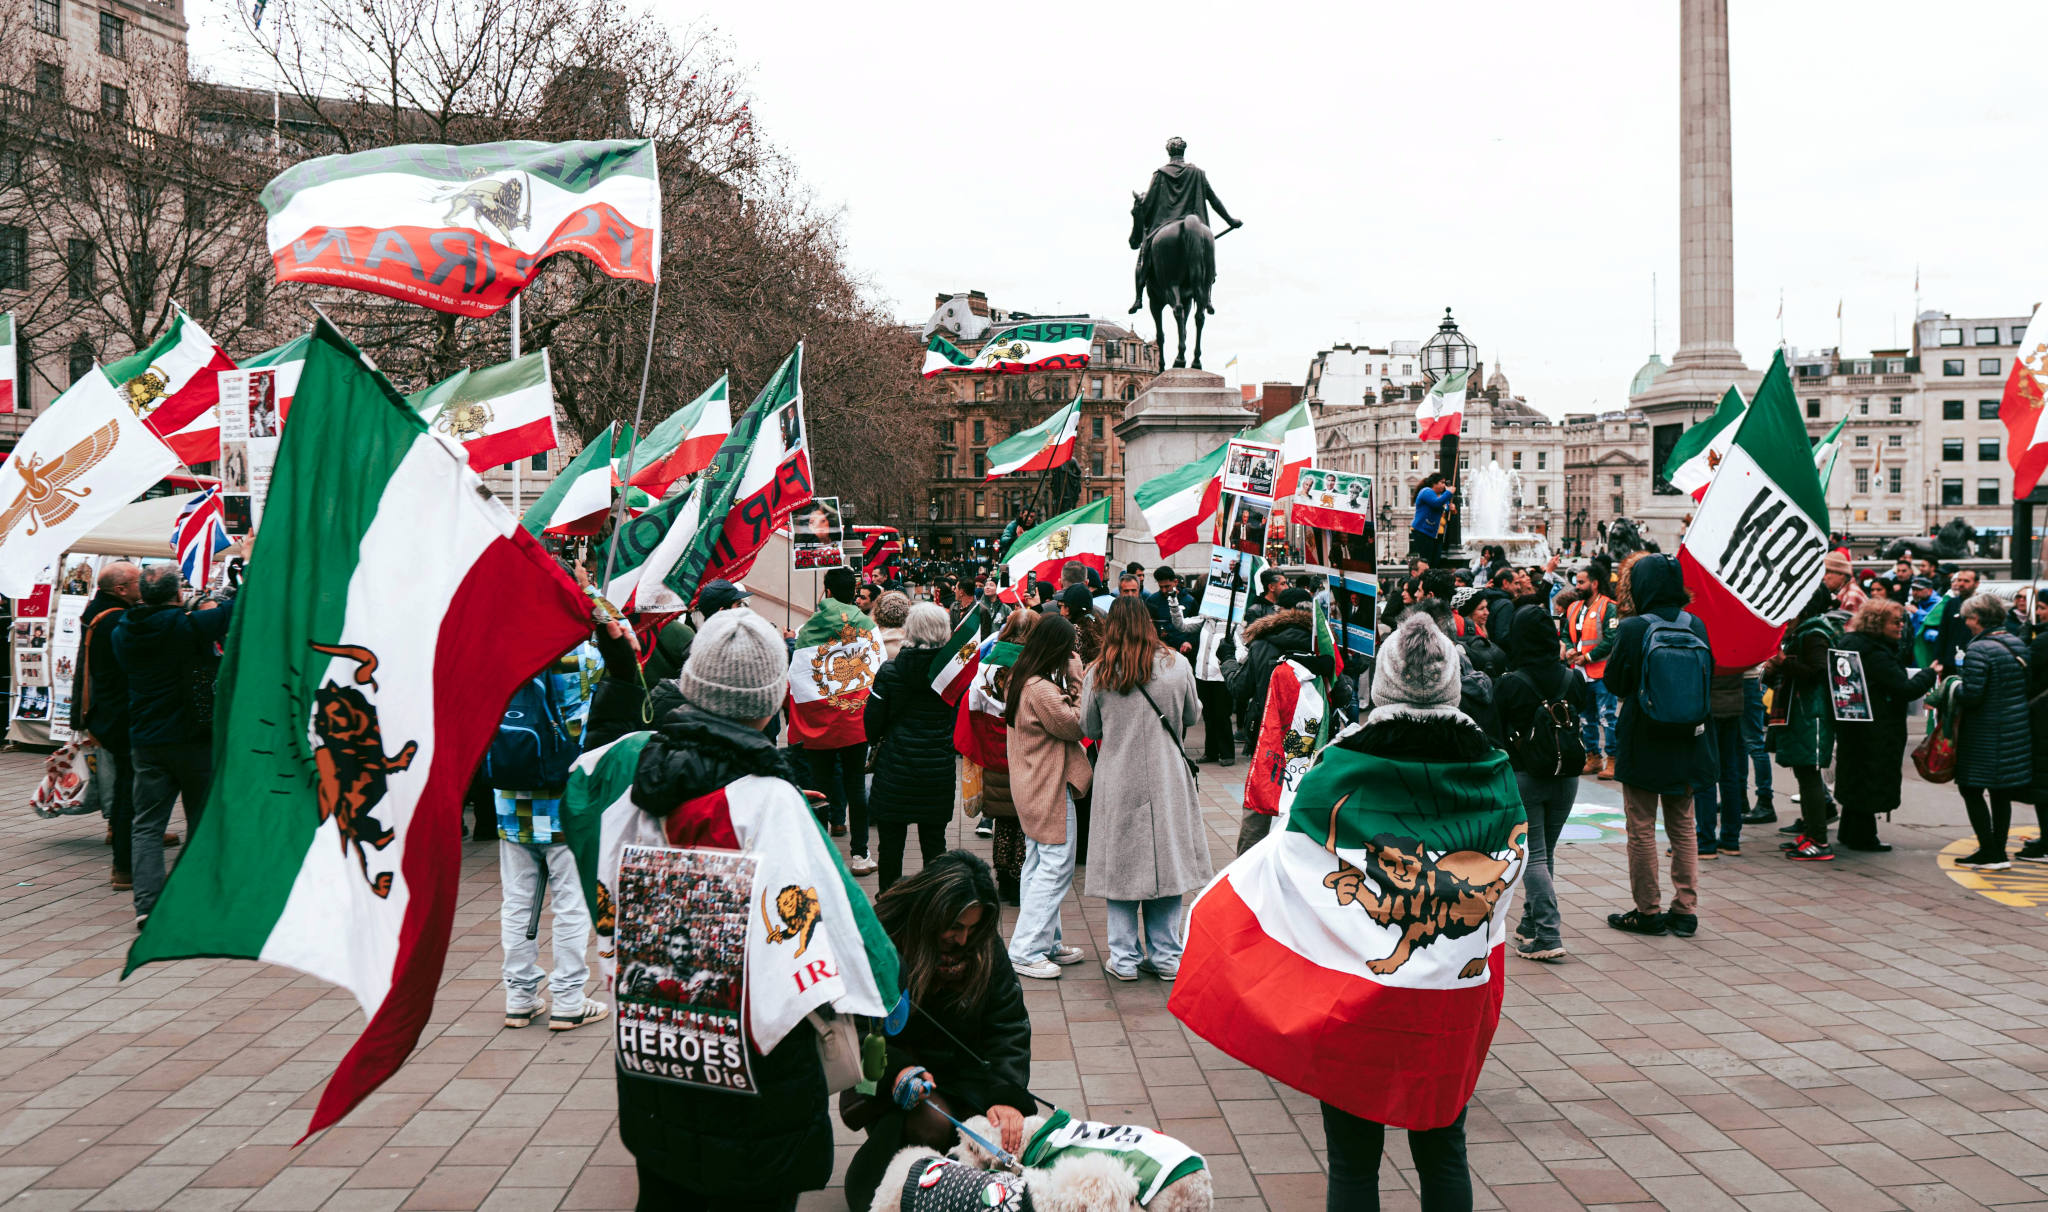 Supporters of the ousted Shah protest in London for Iranian regime change Photo Artras Kokorevas  Pexels